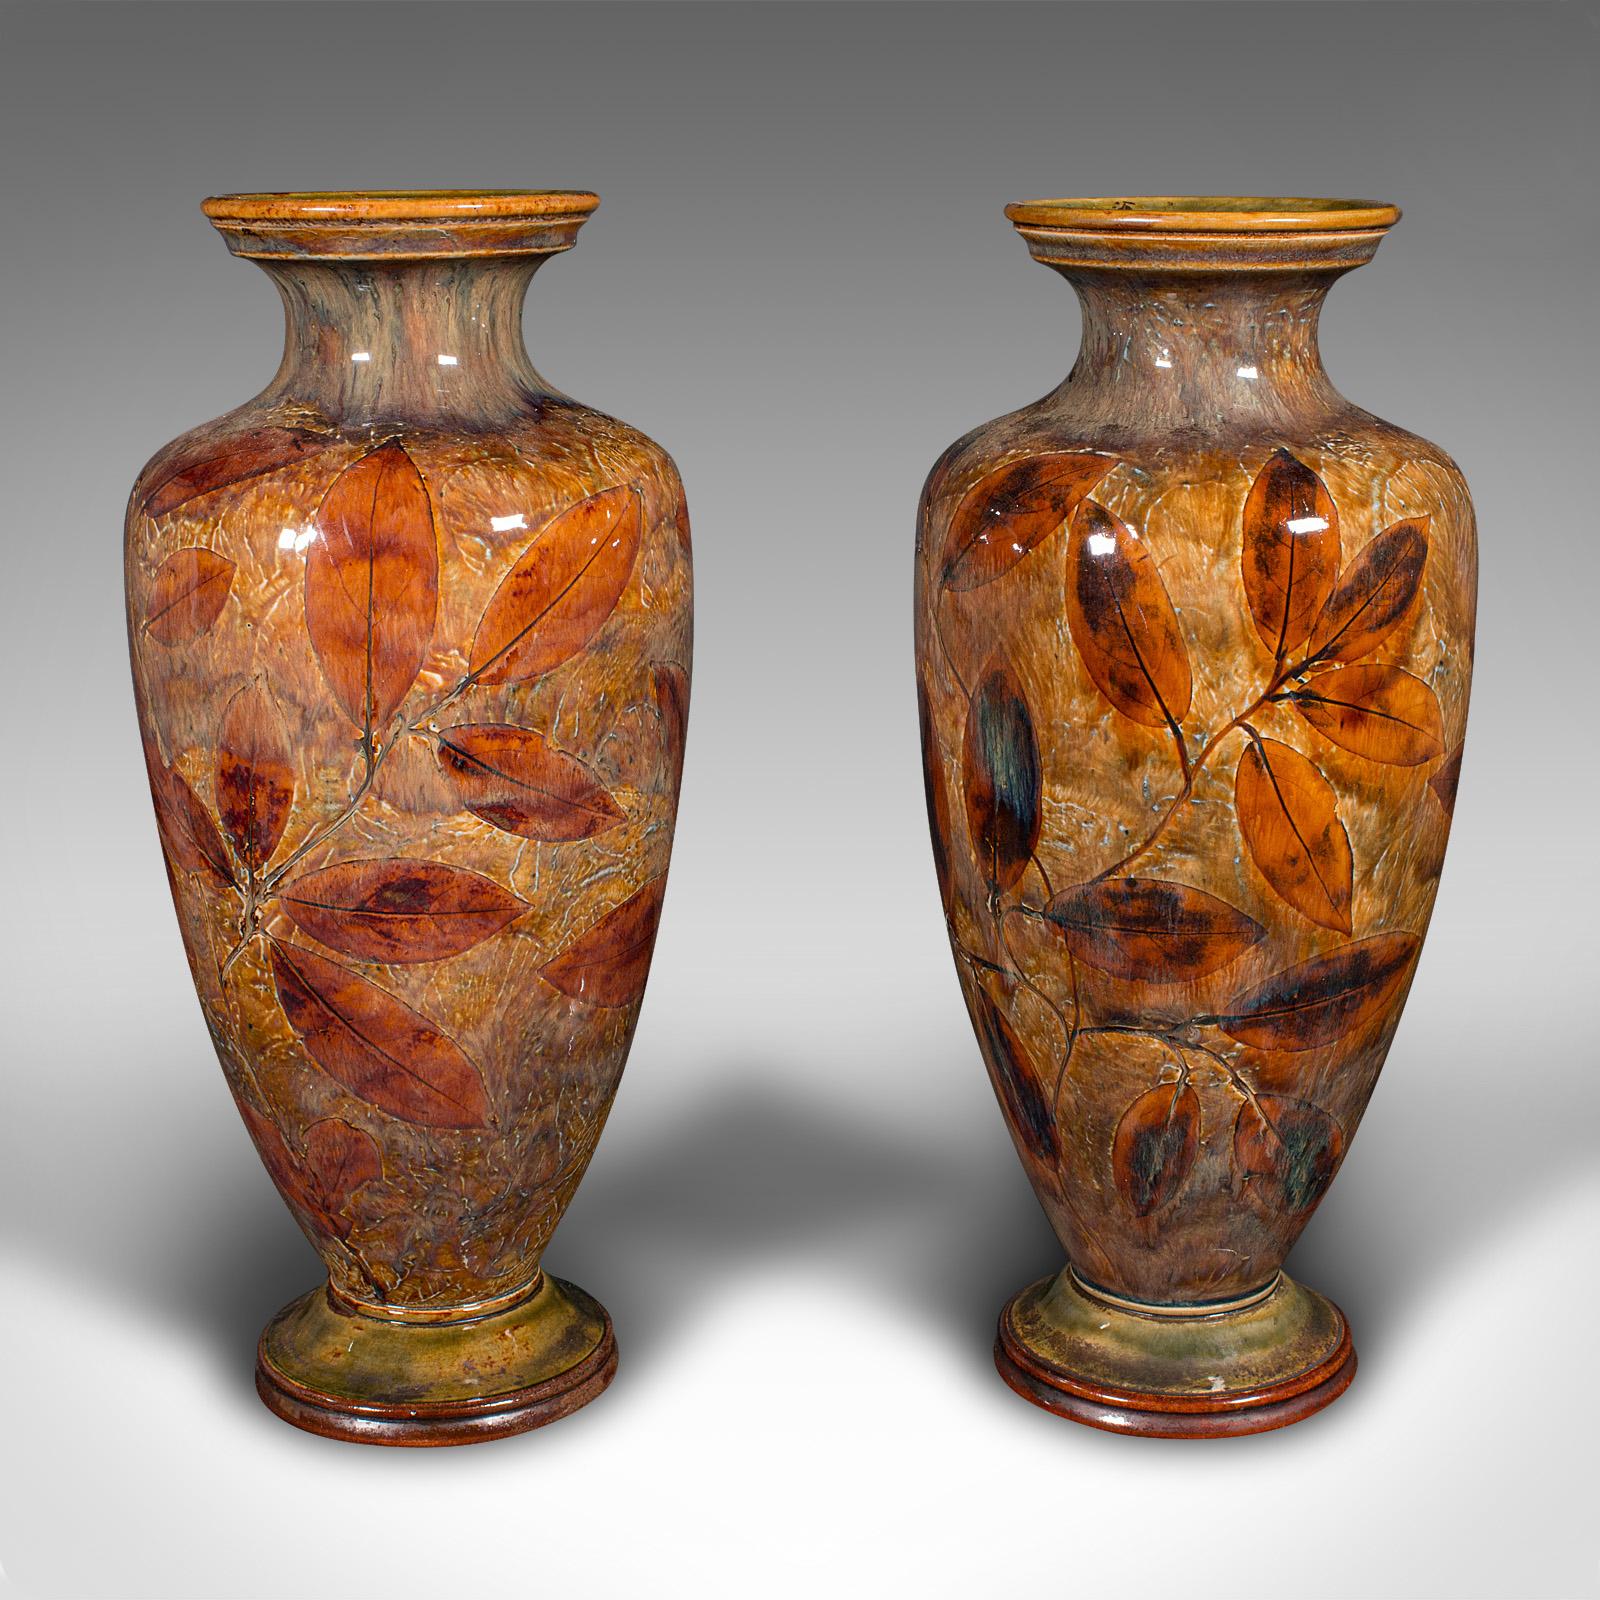 
This is an antique pair of decorative vases. An English, glazed ceramic flower urn, dating to the Edwardian period, circa 1910.

Attractive Autumnal colours accentuate the classic urn form
Displaying a desirable aged patina and in good